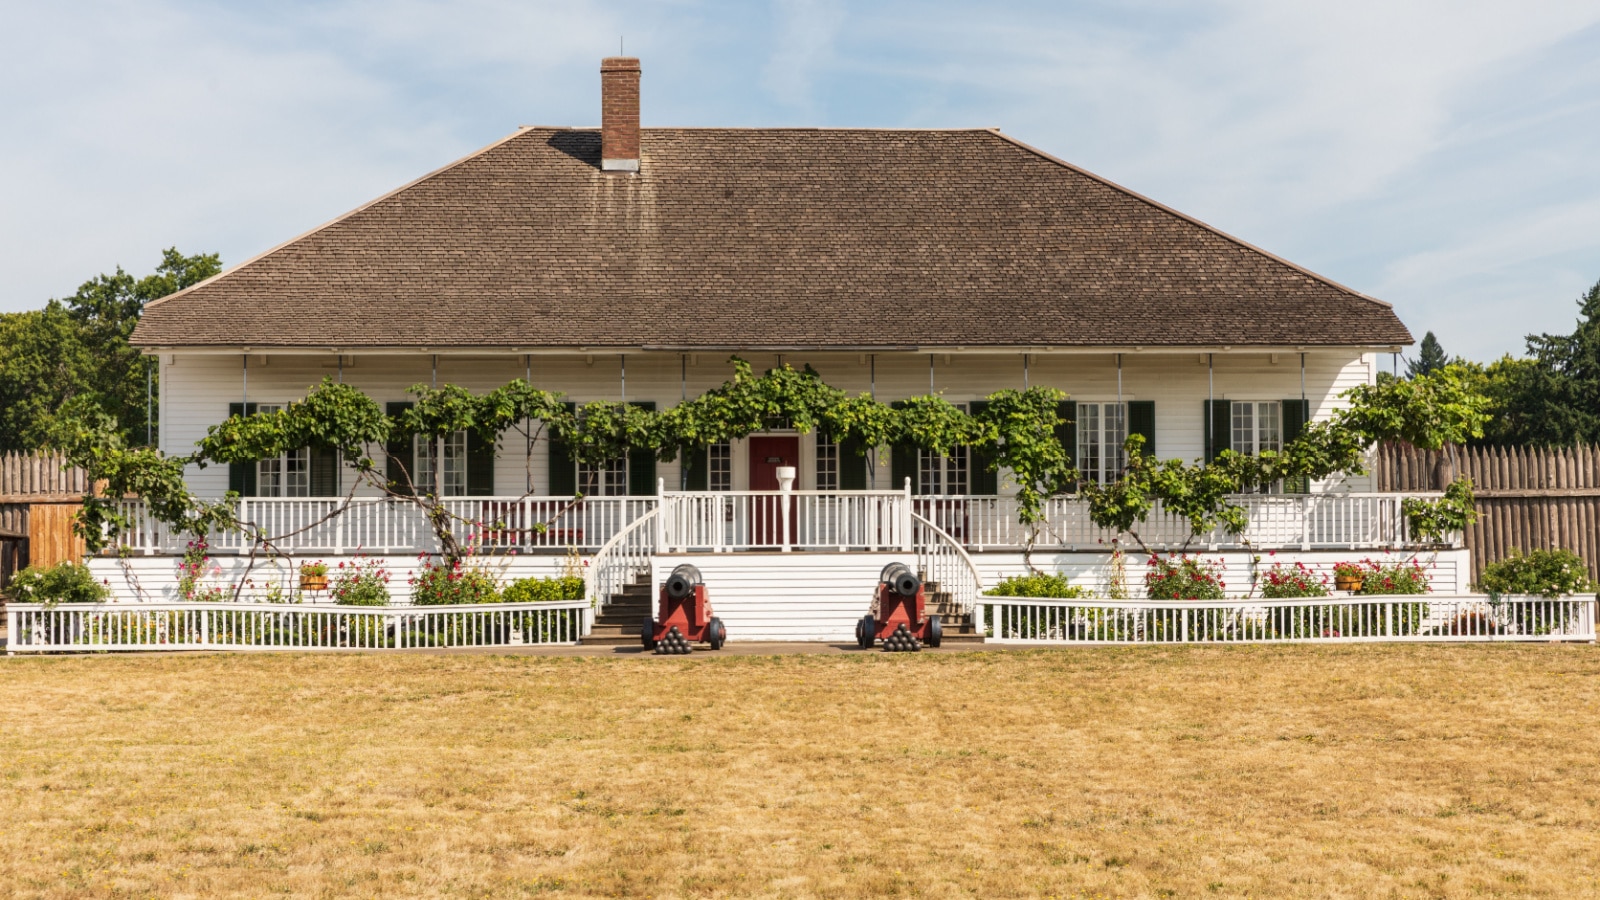 USA, Washington State, Fort Vancouver National Historic Site. August 20, 2019. The Chief Factor's house at the Hudson's Bay Company's Fort Vancouver.